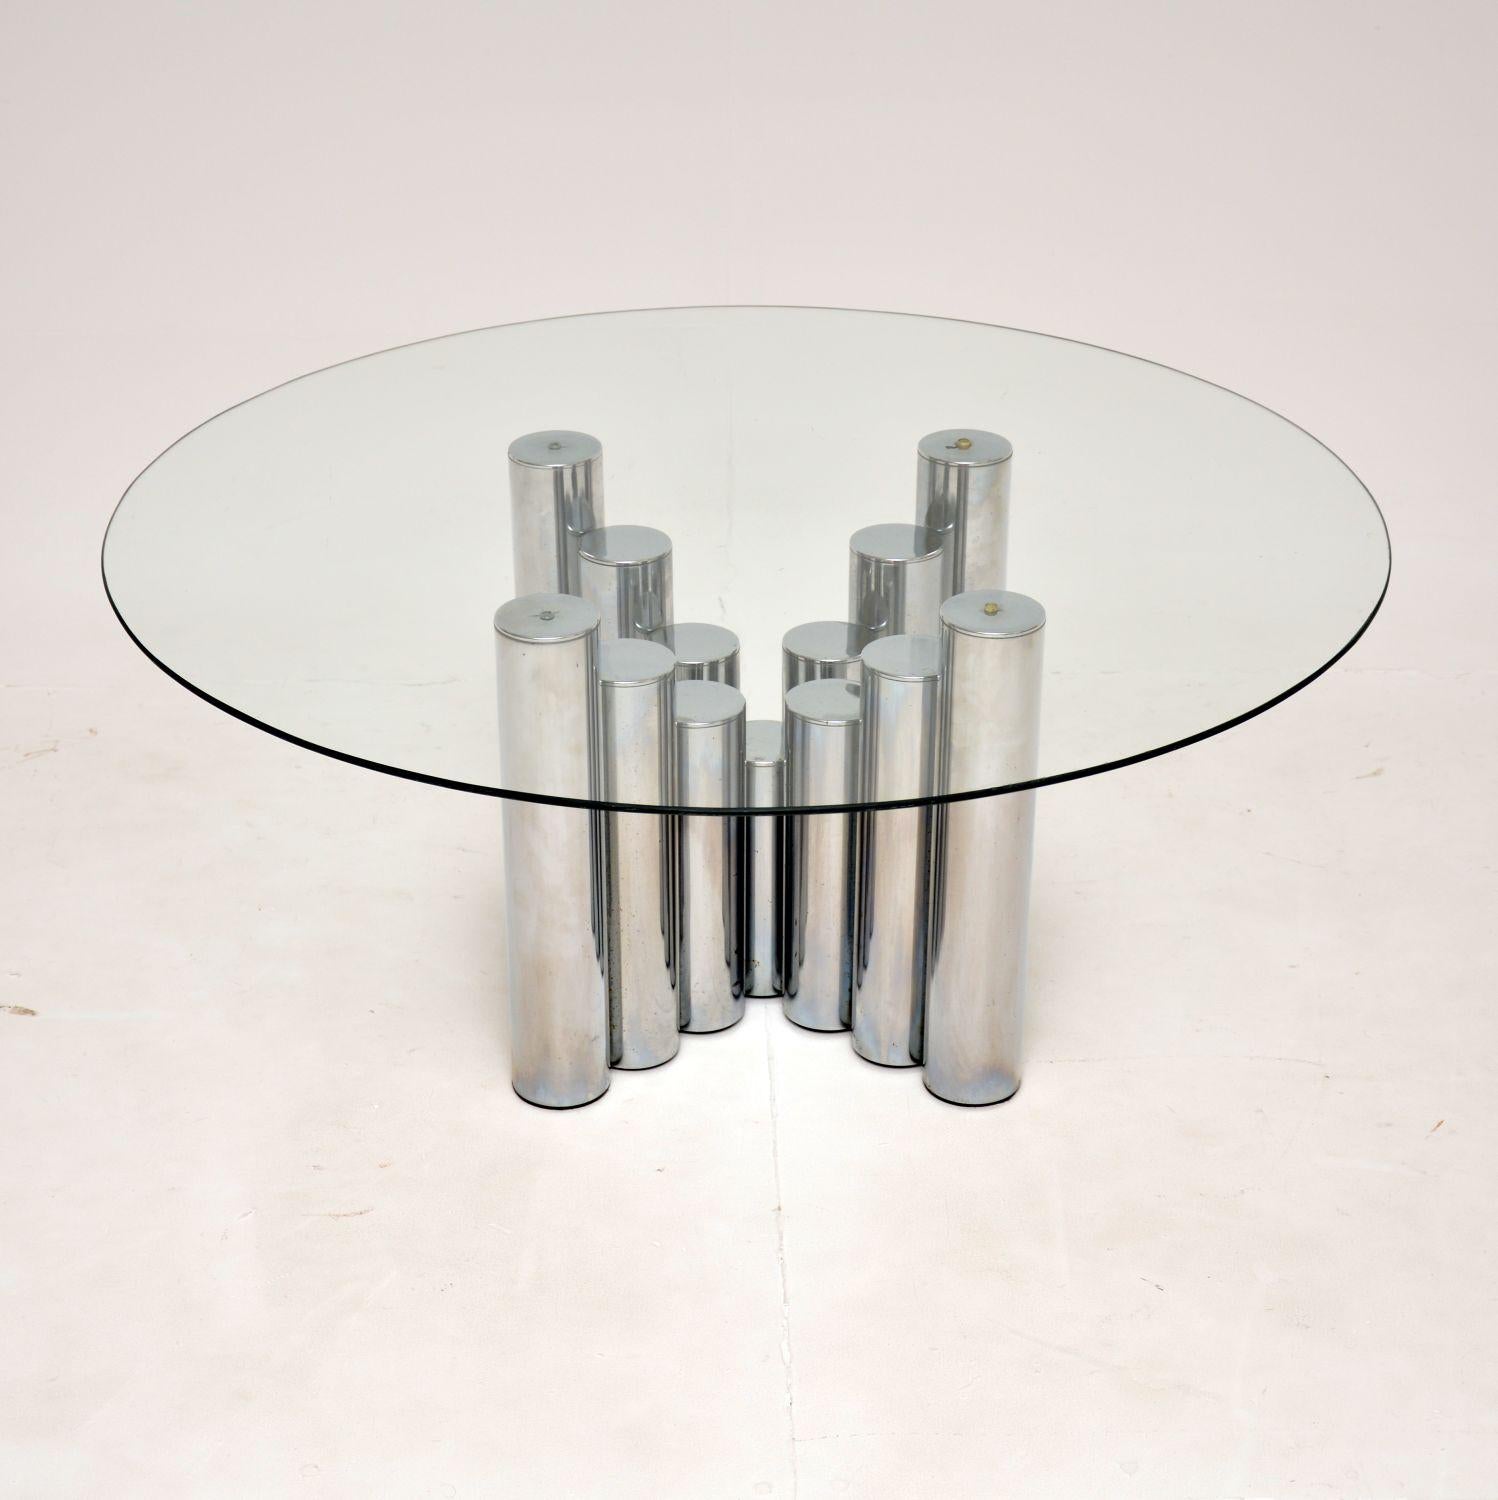 A gorgeous and rare coffee table, designed by Tim Bates for Pieff of Worcester. This was made in England, it dates from the 1970’s. The base has a beautiful stepped design, made from tubular chromed steel. The circular glass top is toughened and